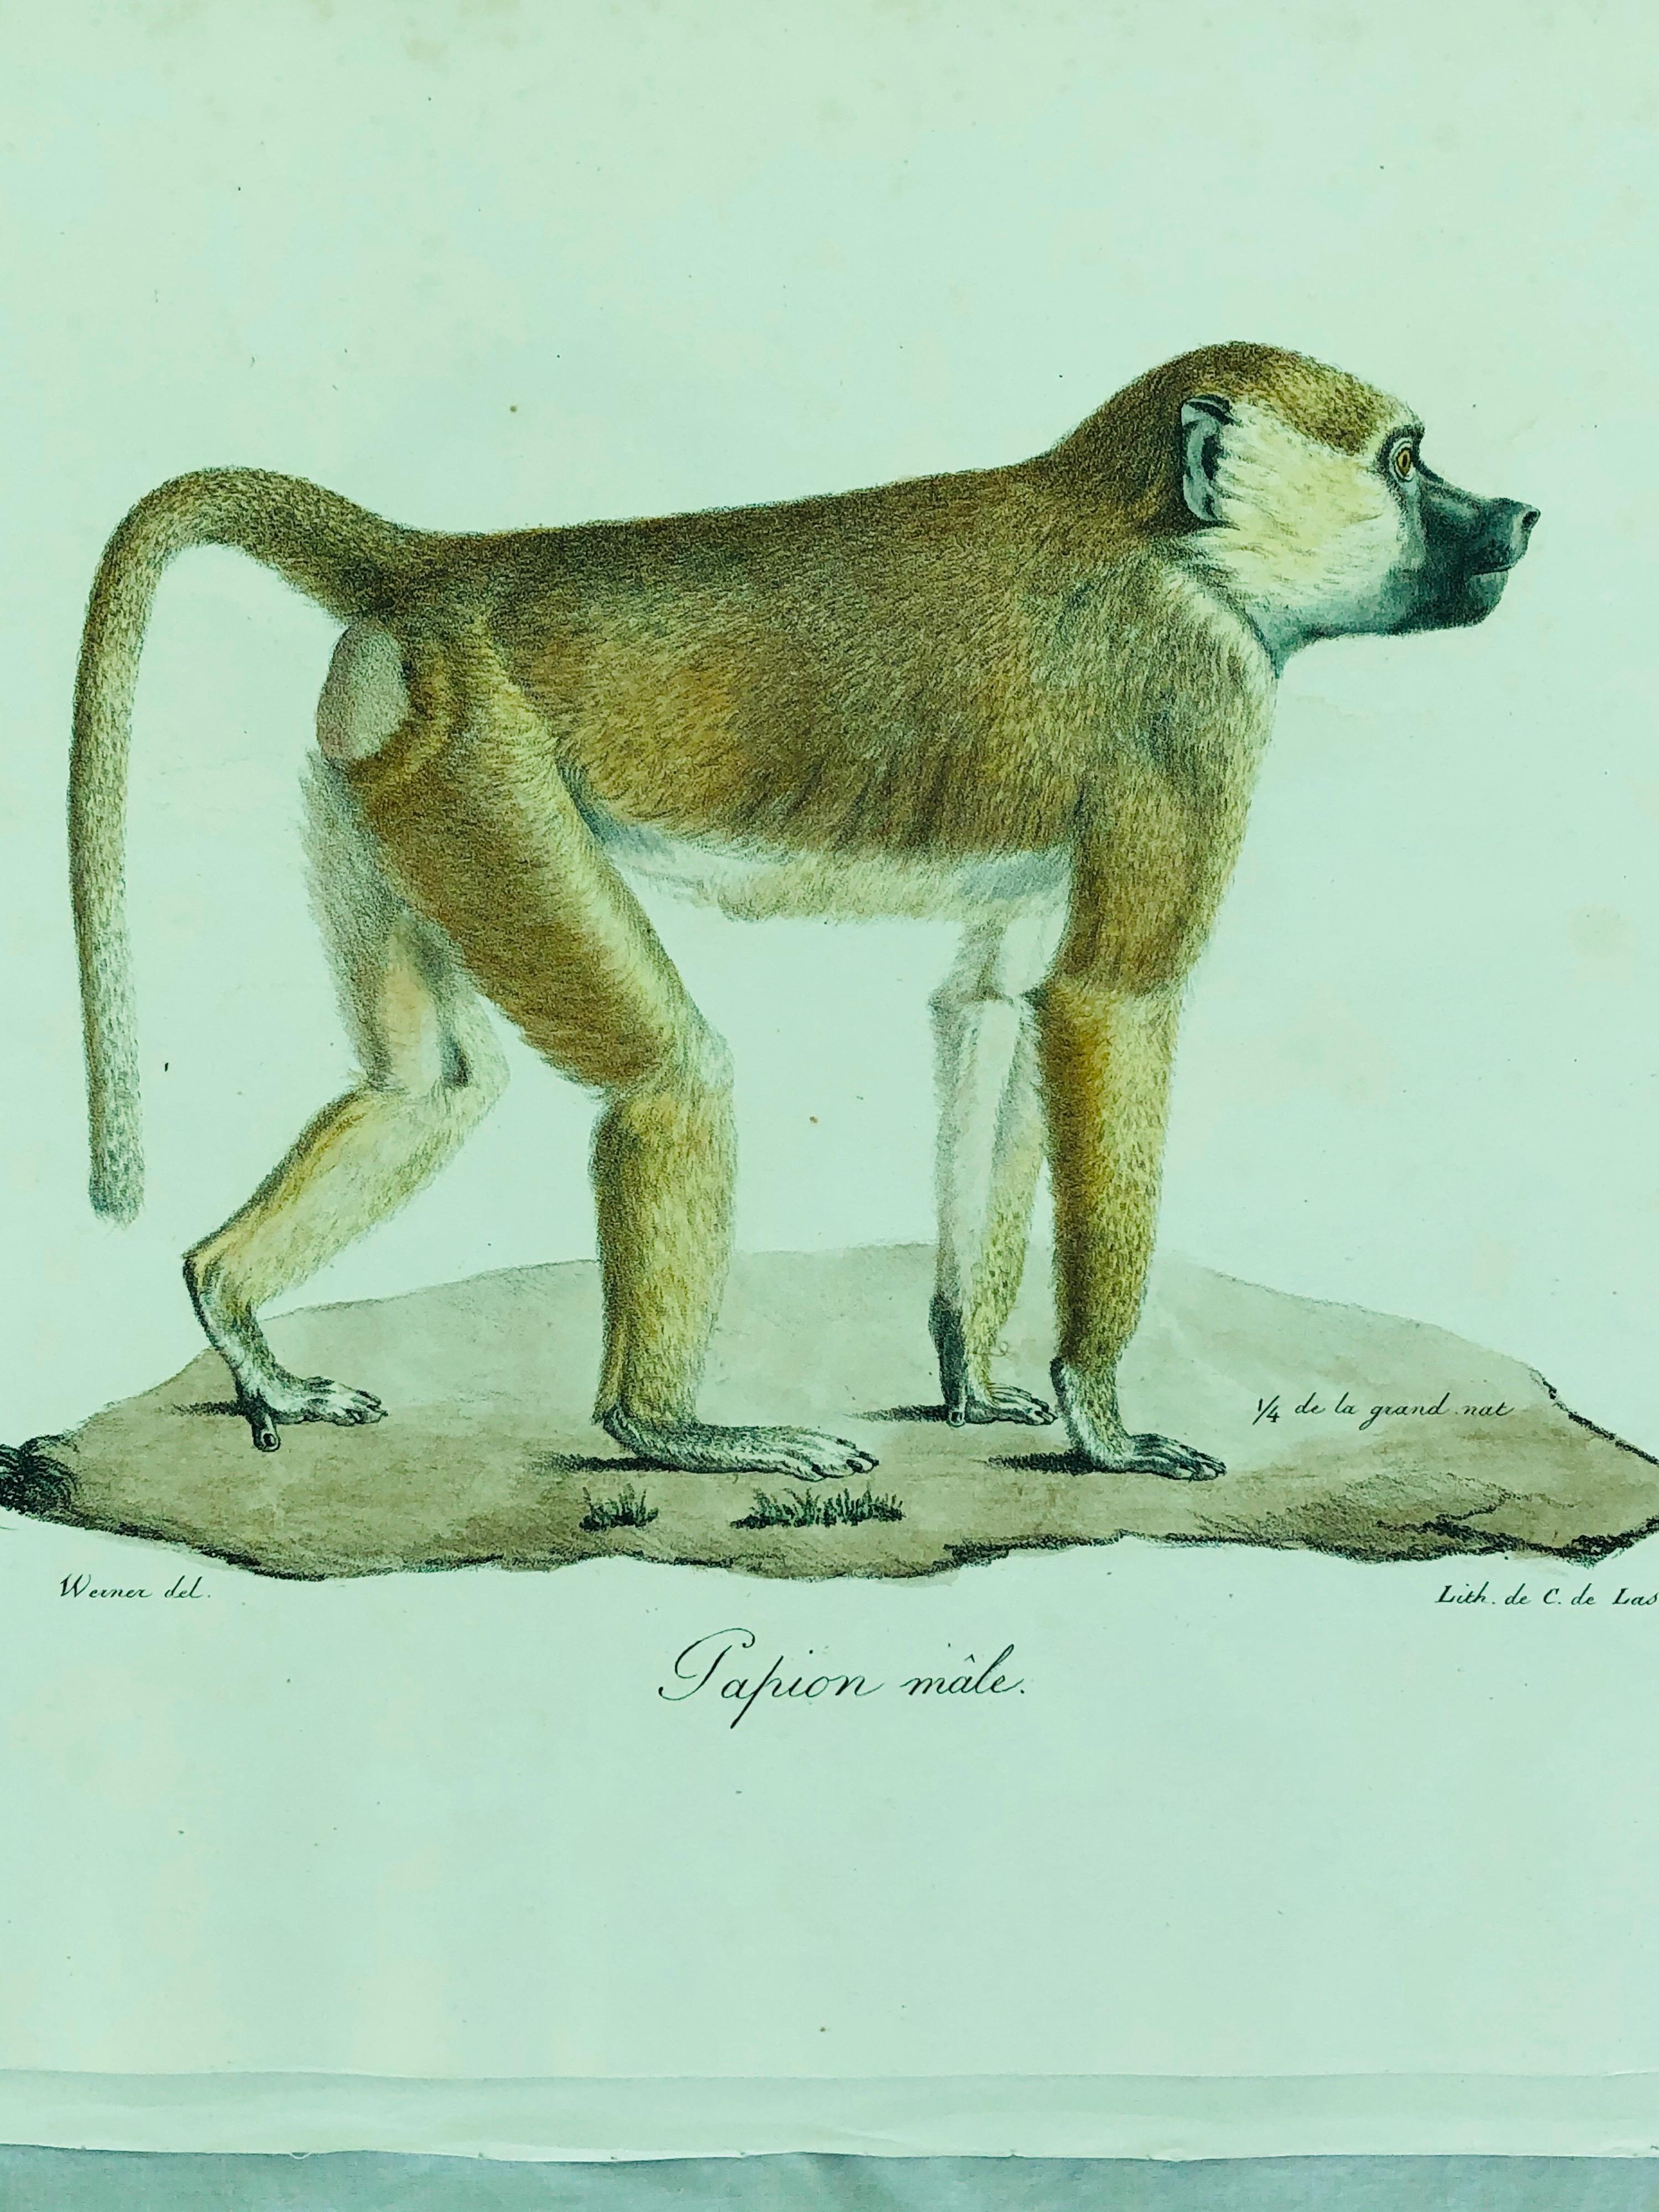 Five 19th century unframed early monkey engravings painted by Jean-Charles Werner and printed by lithographer C. de Last. From the Cuvier Histoire Naturelle. Comprising Papien male, Babouin male, Tamarin; Chacma male tres vieux and Magot male. All